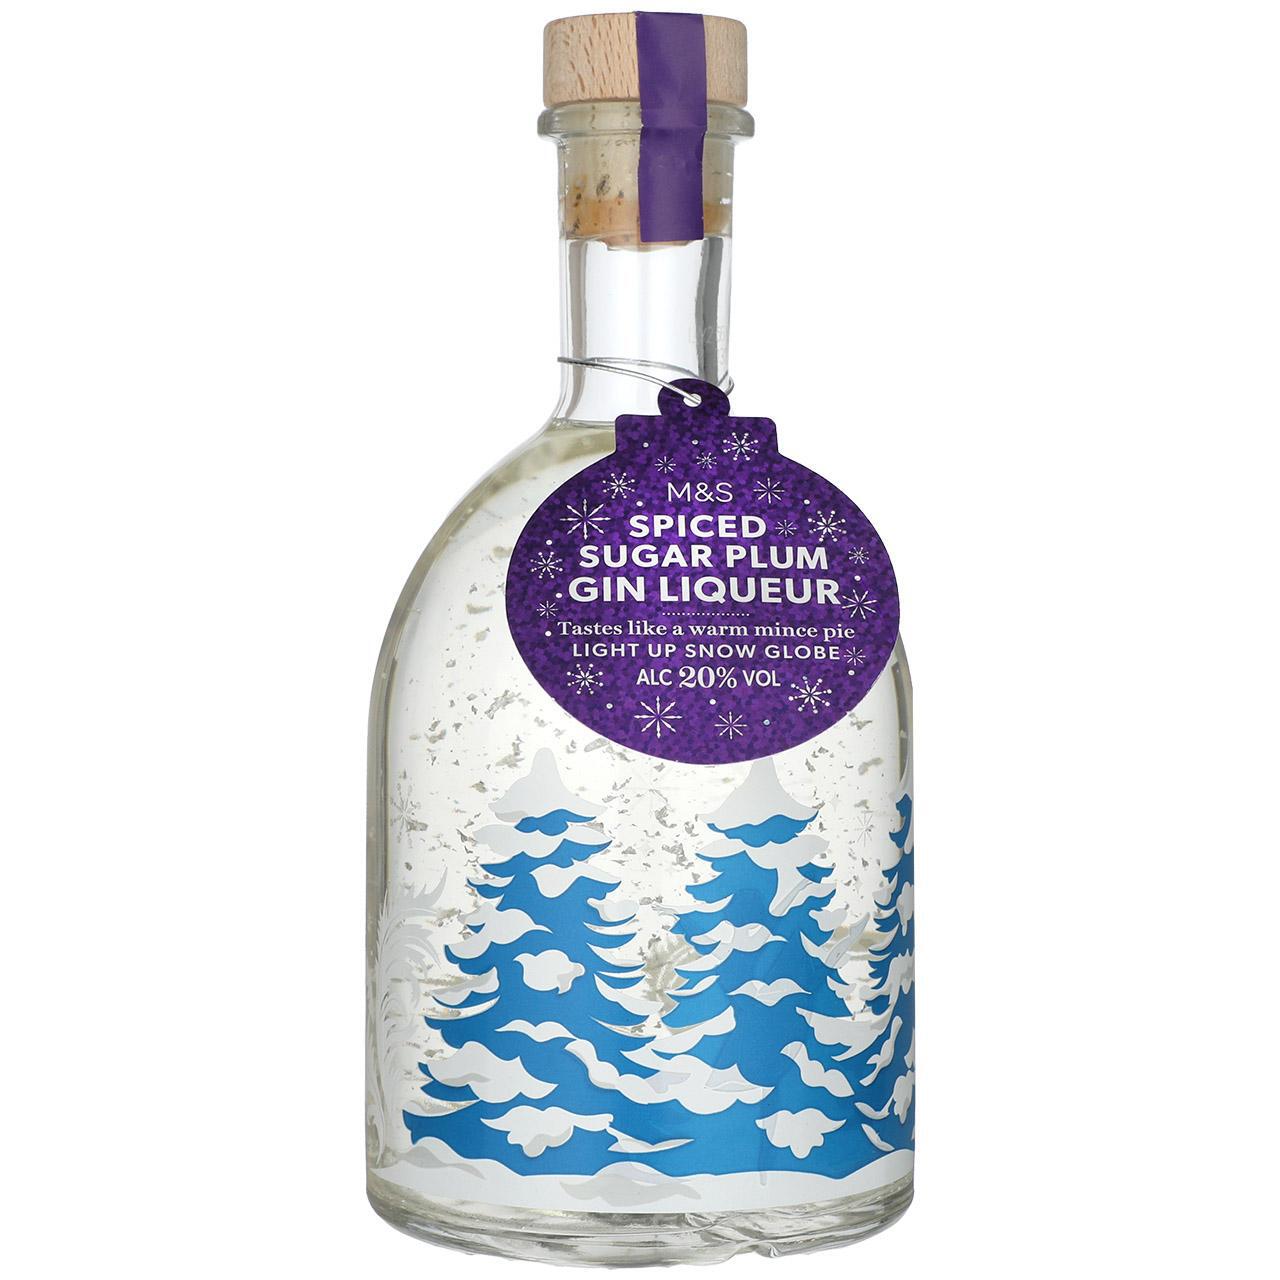 Marks and spencer sugar plum gin